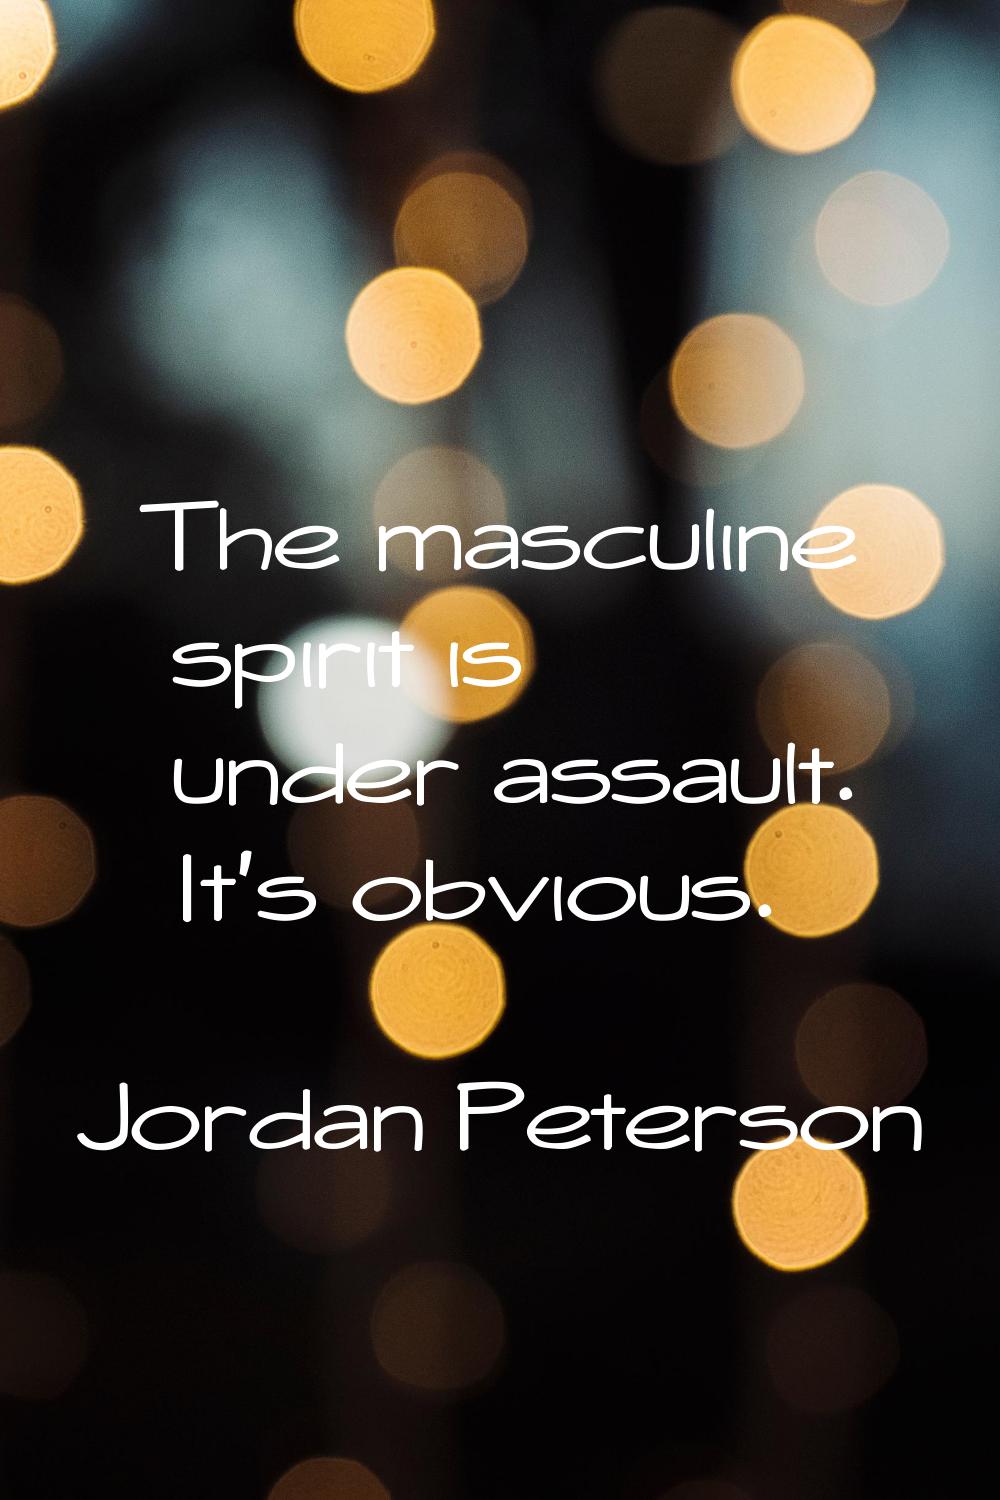 The masculine spirit is under assault. It's obvious.